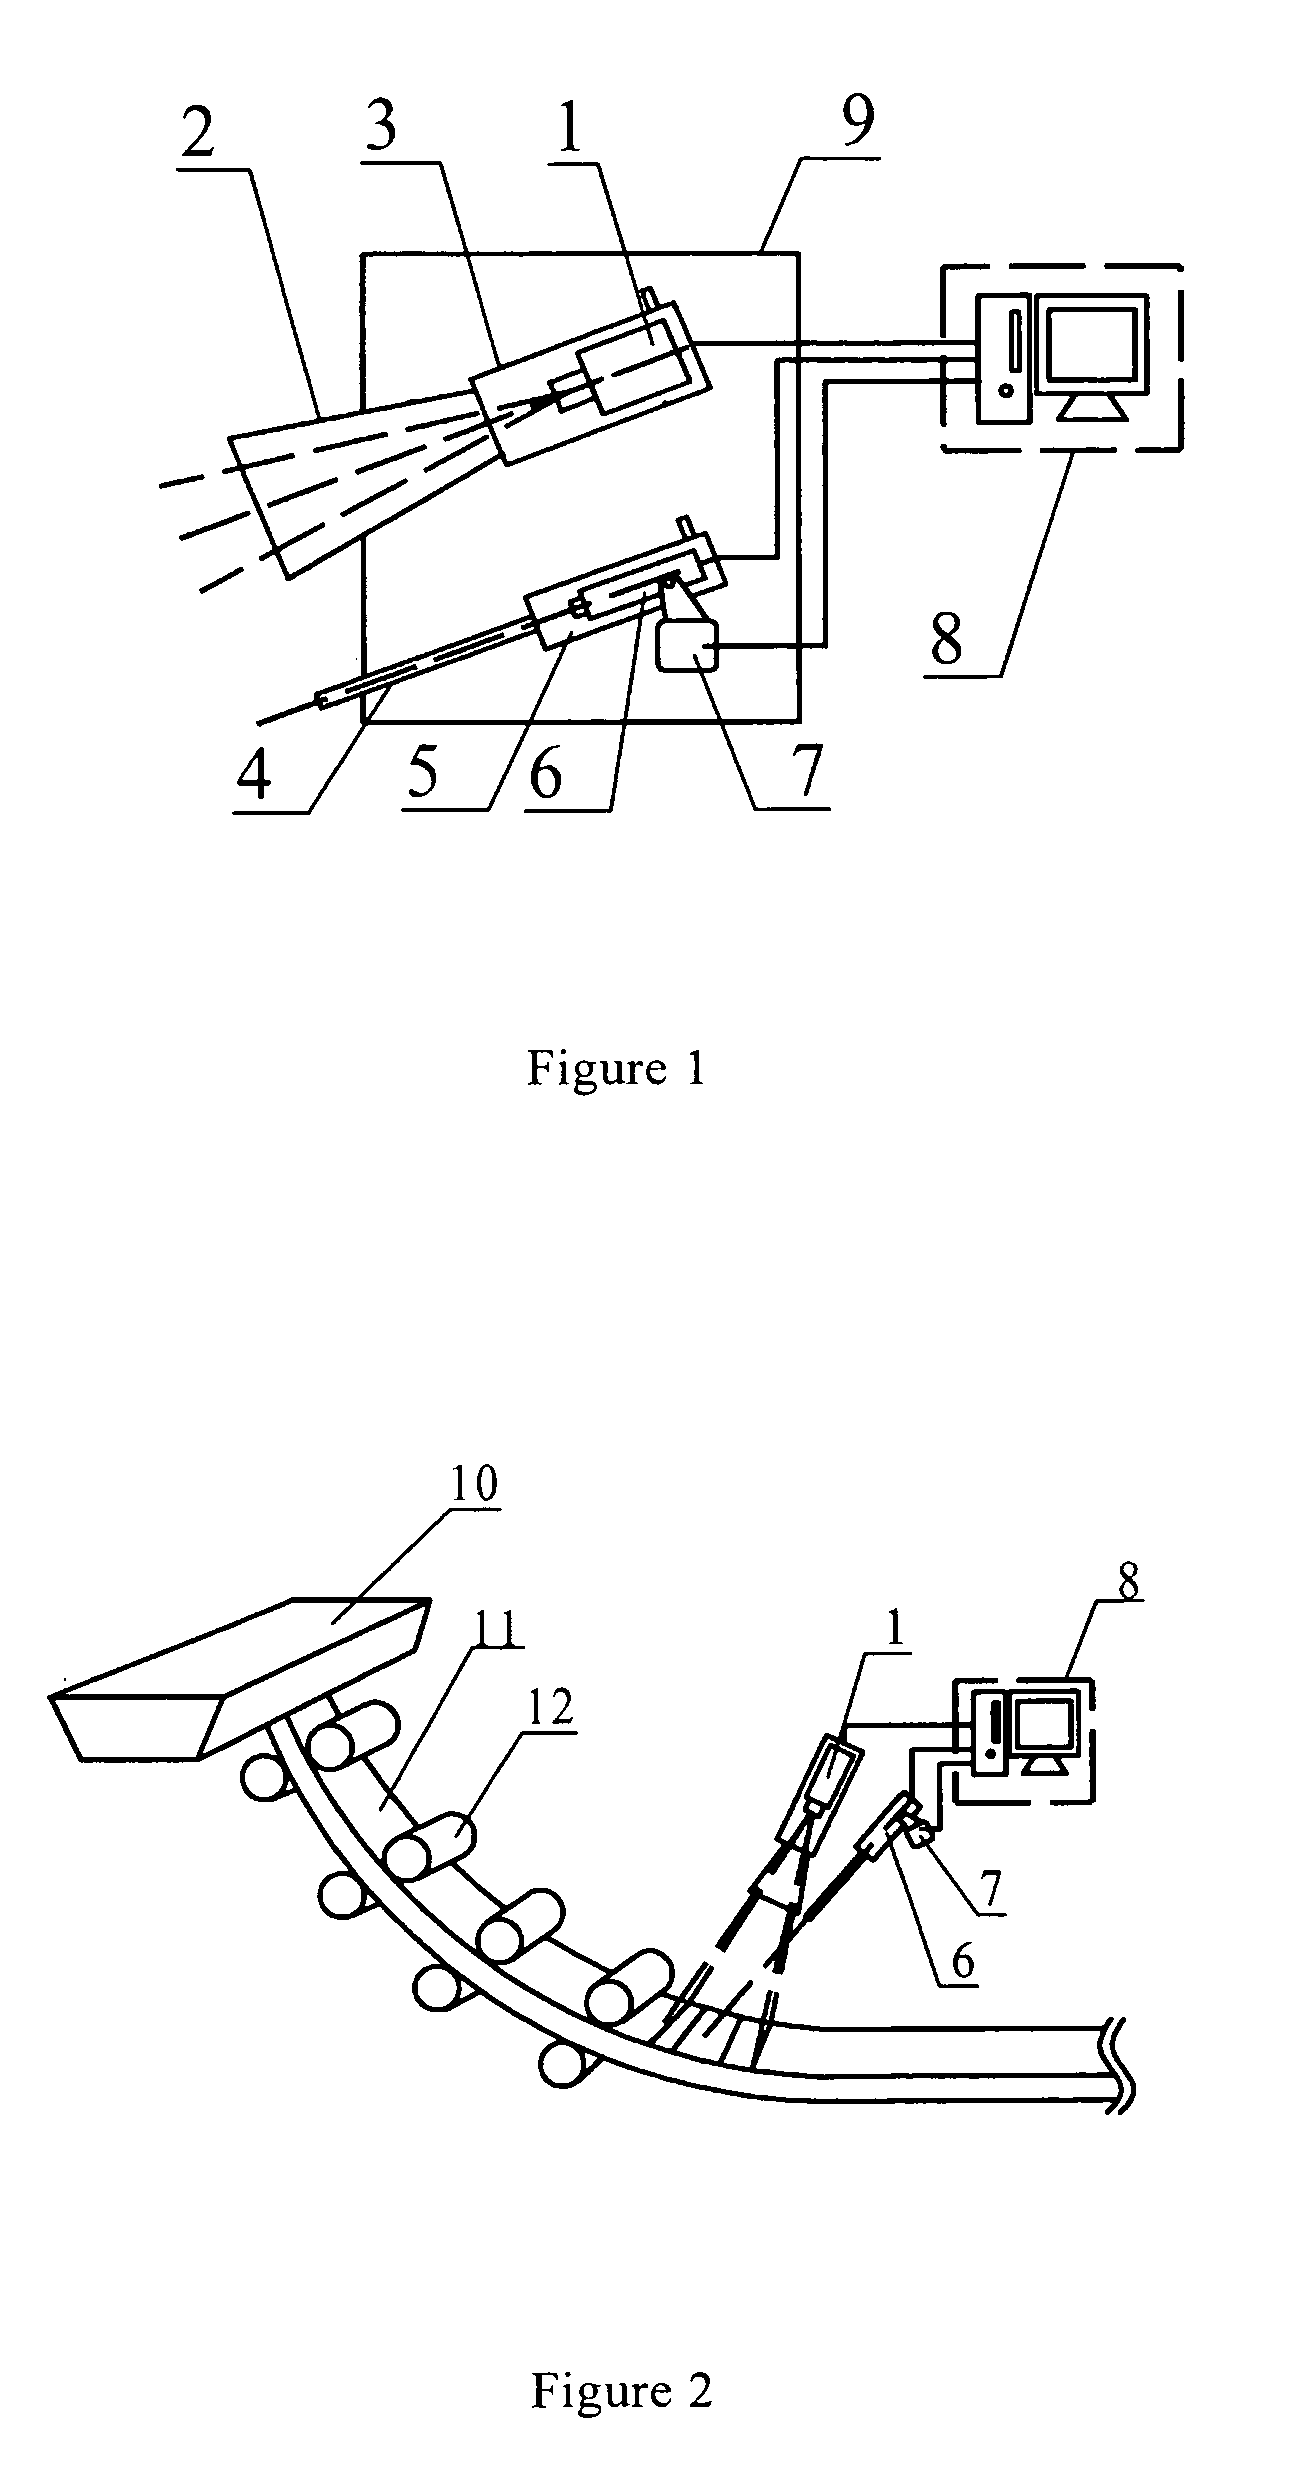 Apparatus and method for measuring the surface temperature of continuous casting billet/slab